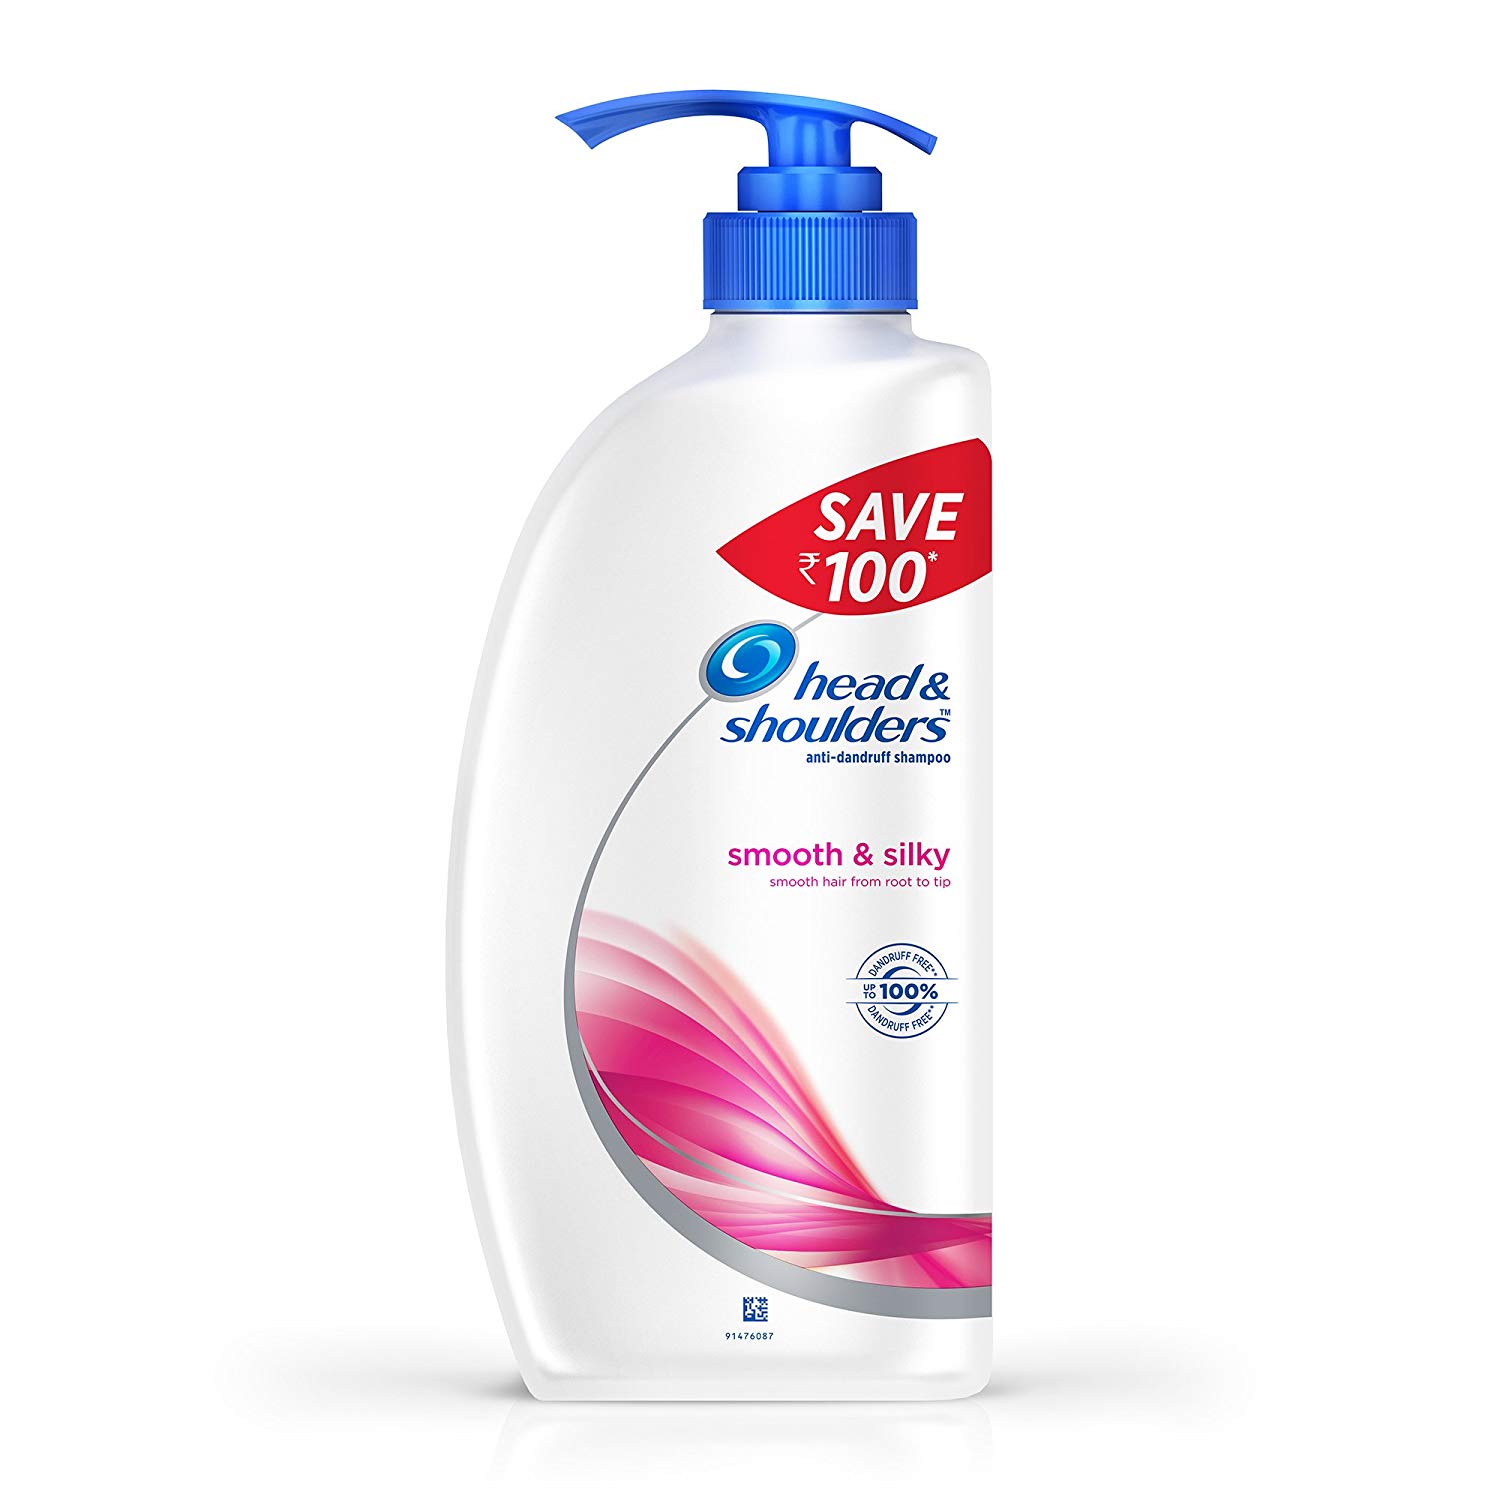 Head & Shoulders Smooth and Silky Shampoo, 750ml